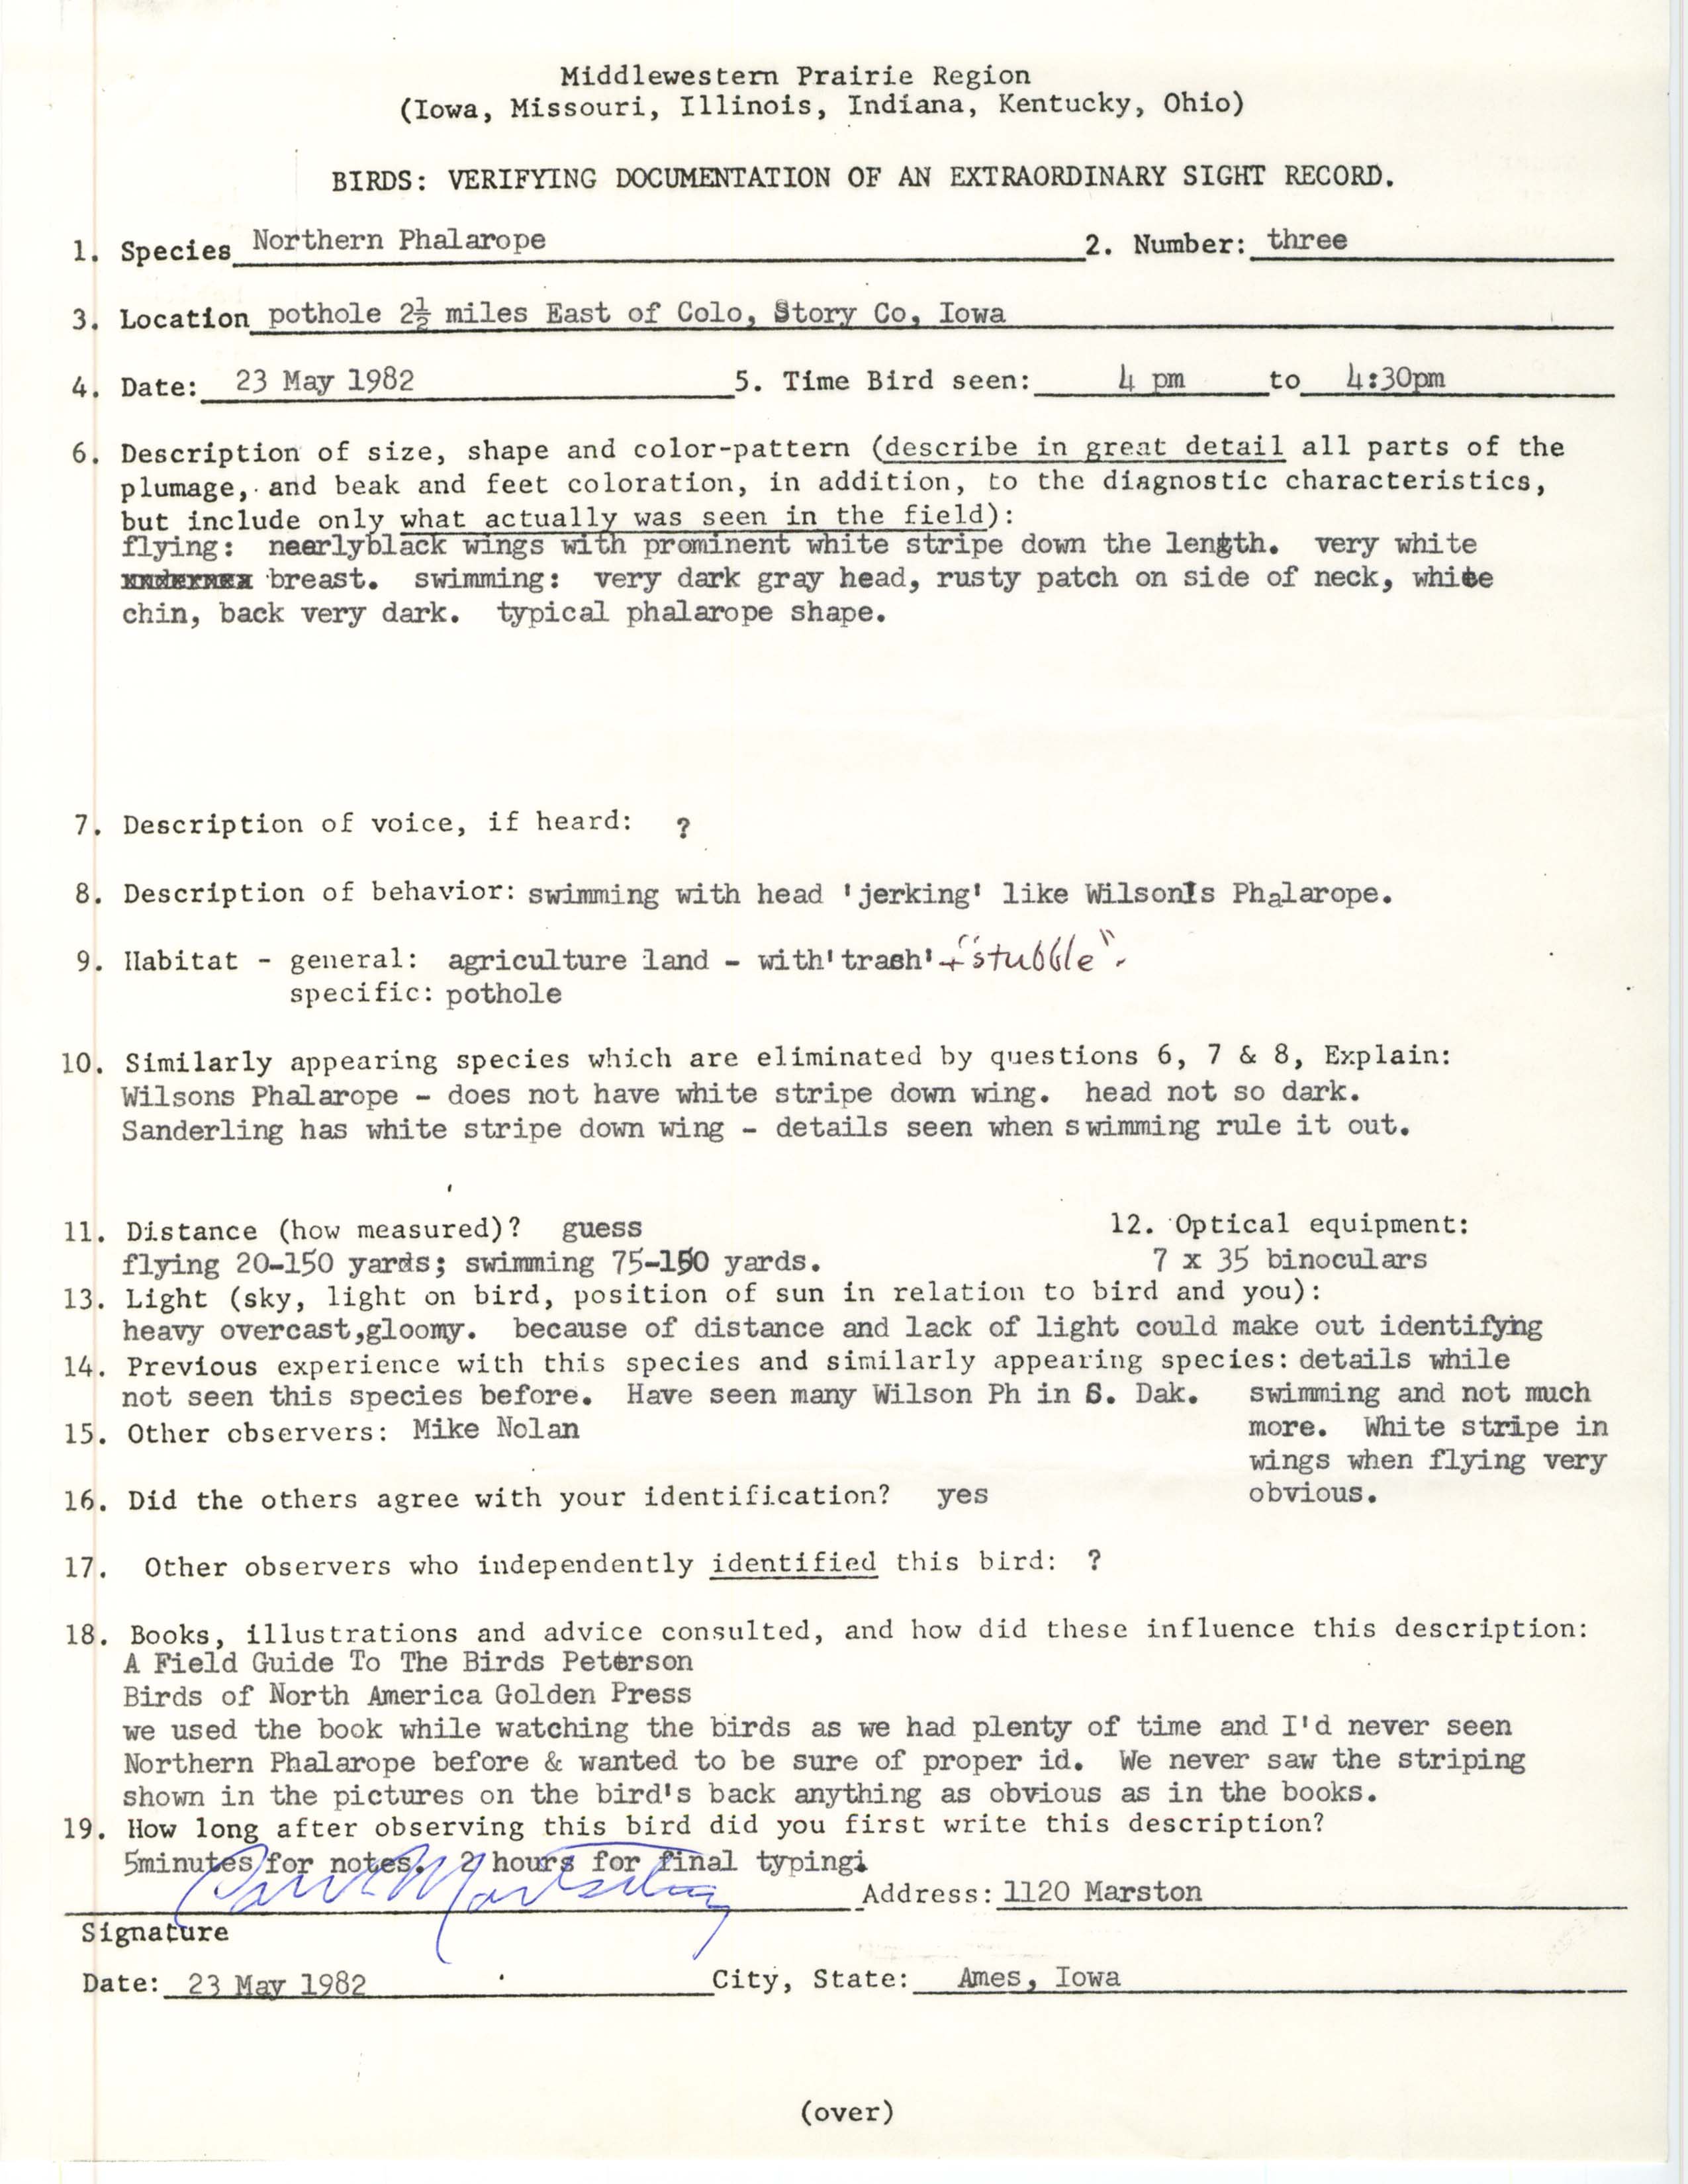 Rare bird documentation form for Red-necked Phalarope east of Colo, 1982.